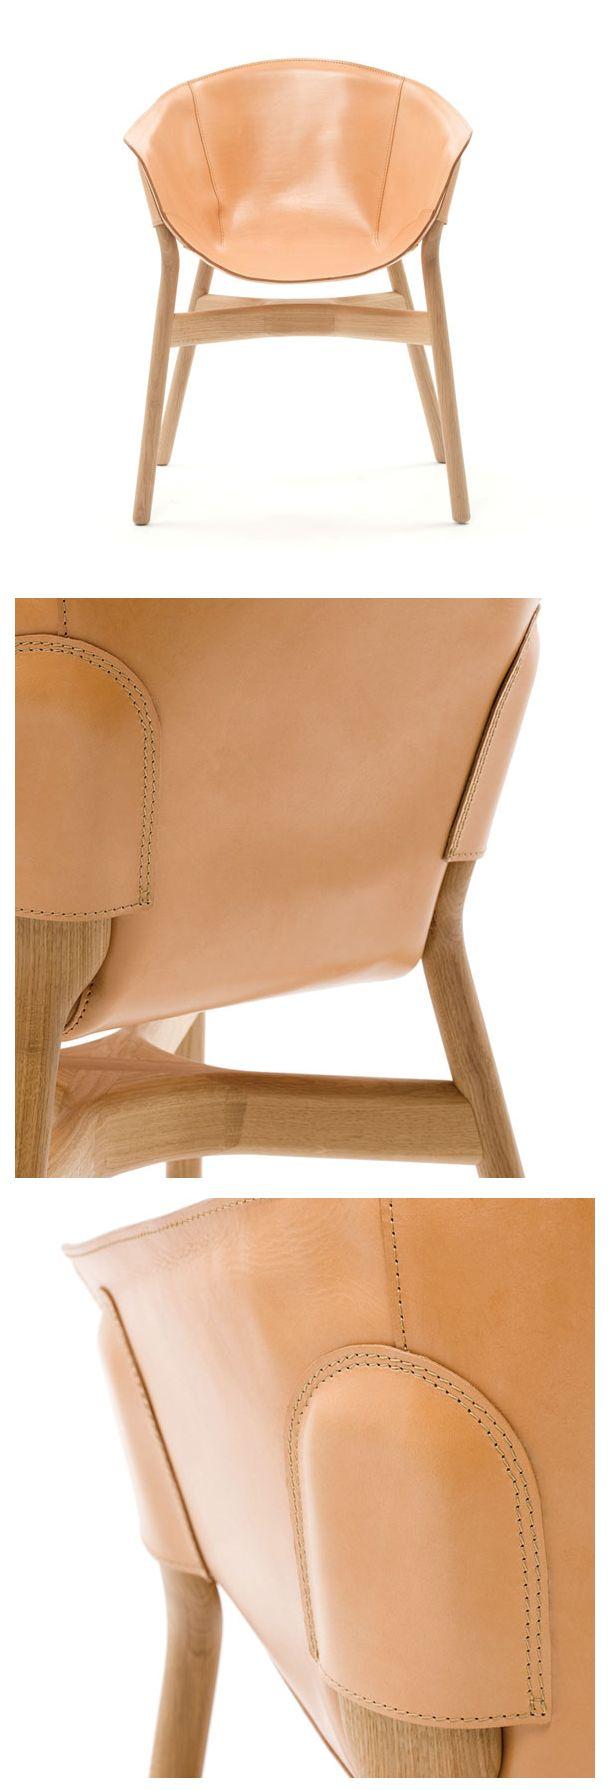 Pocket chair - Ding 3000 - 2